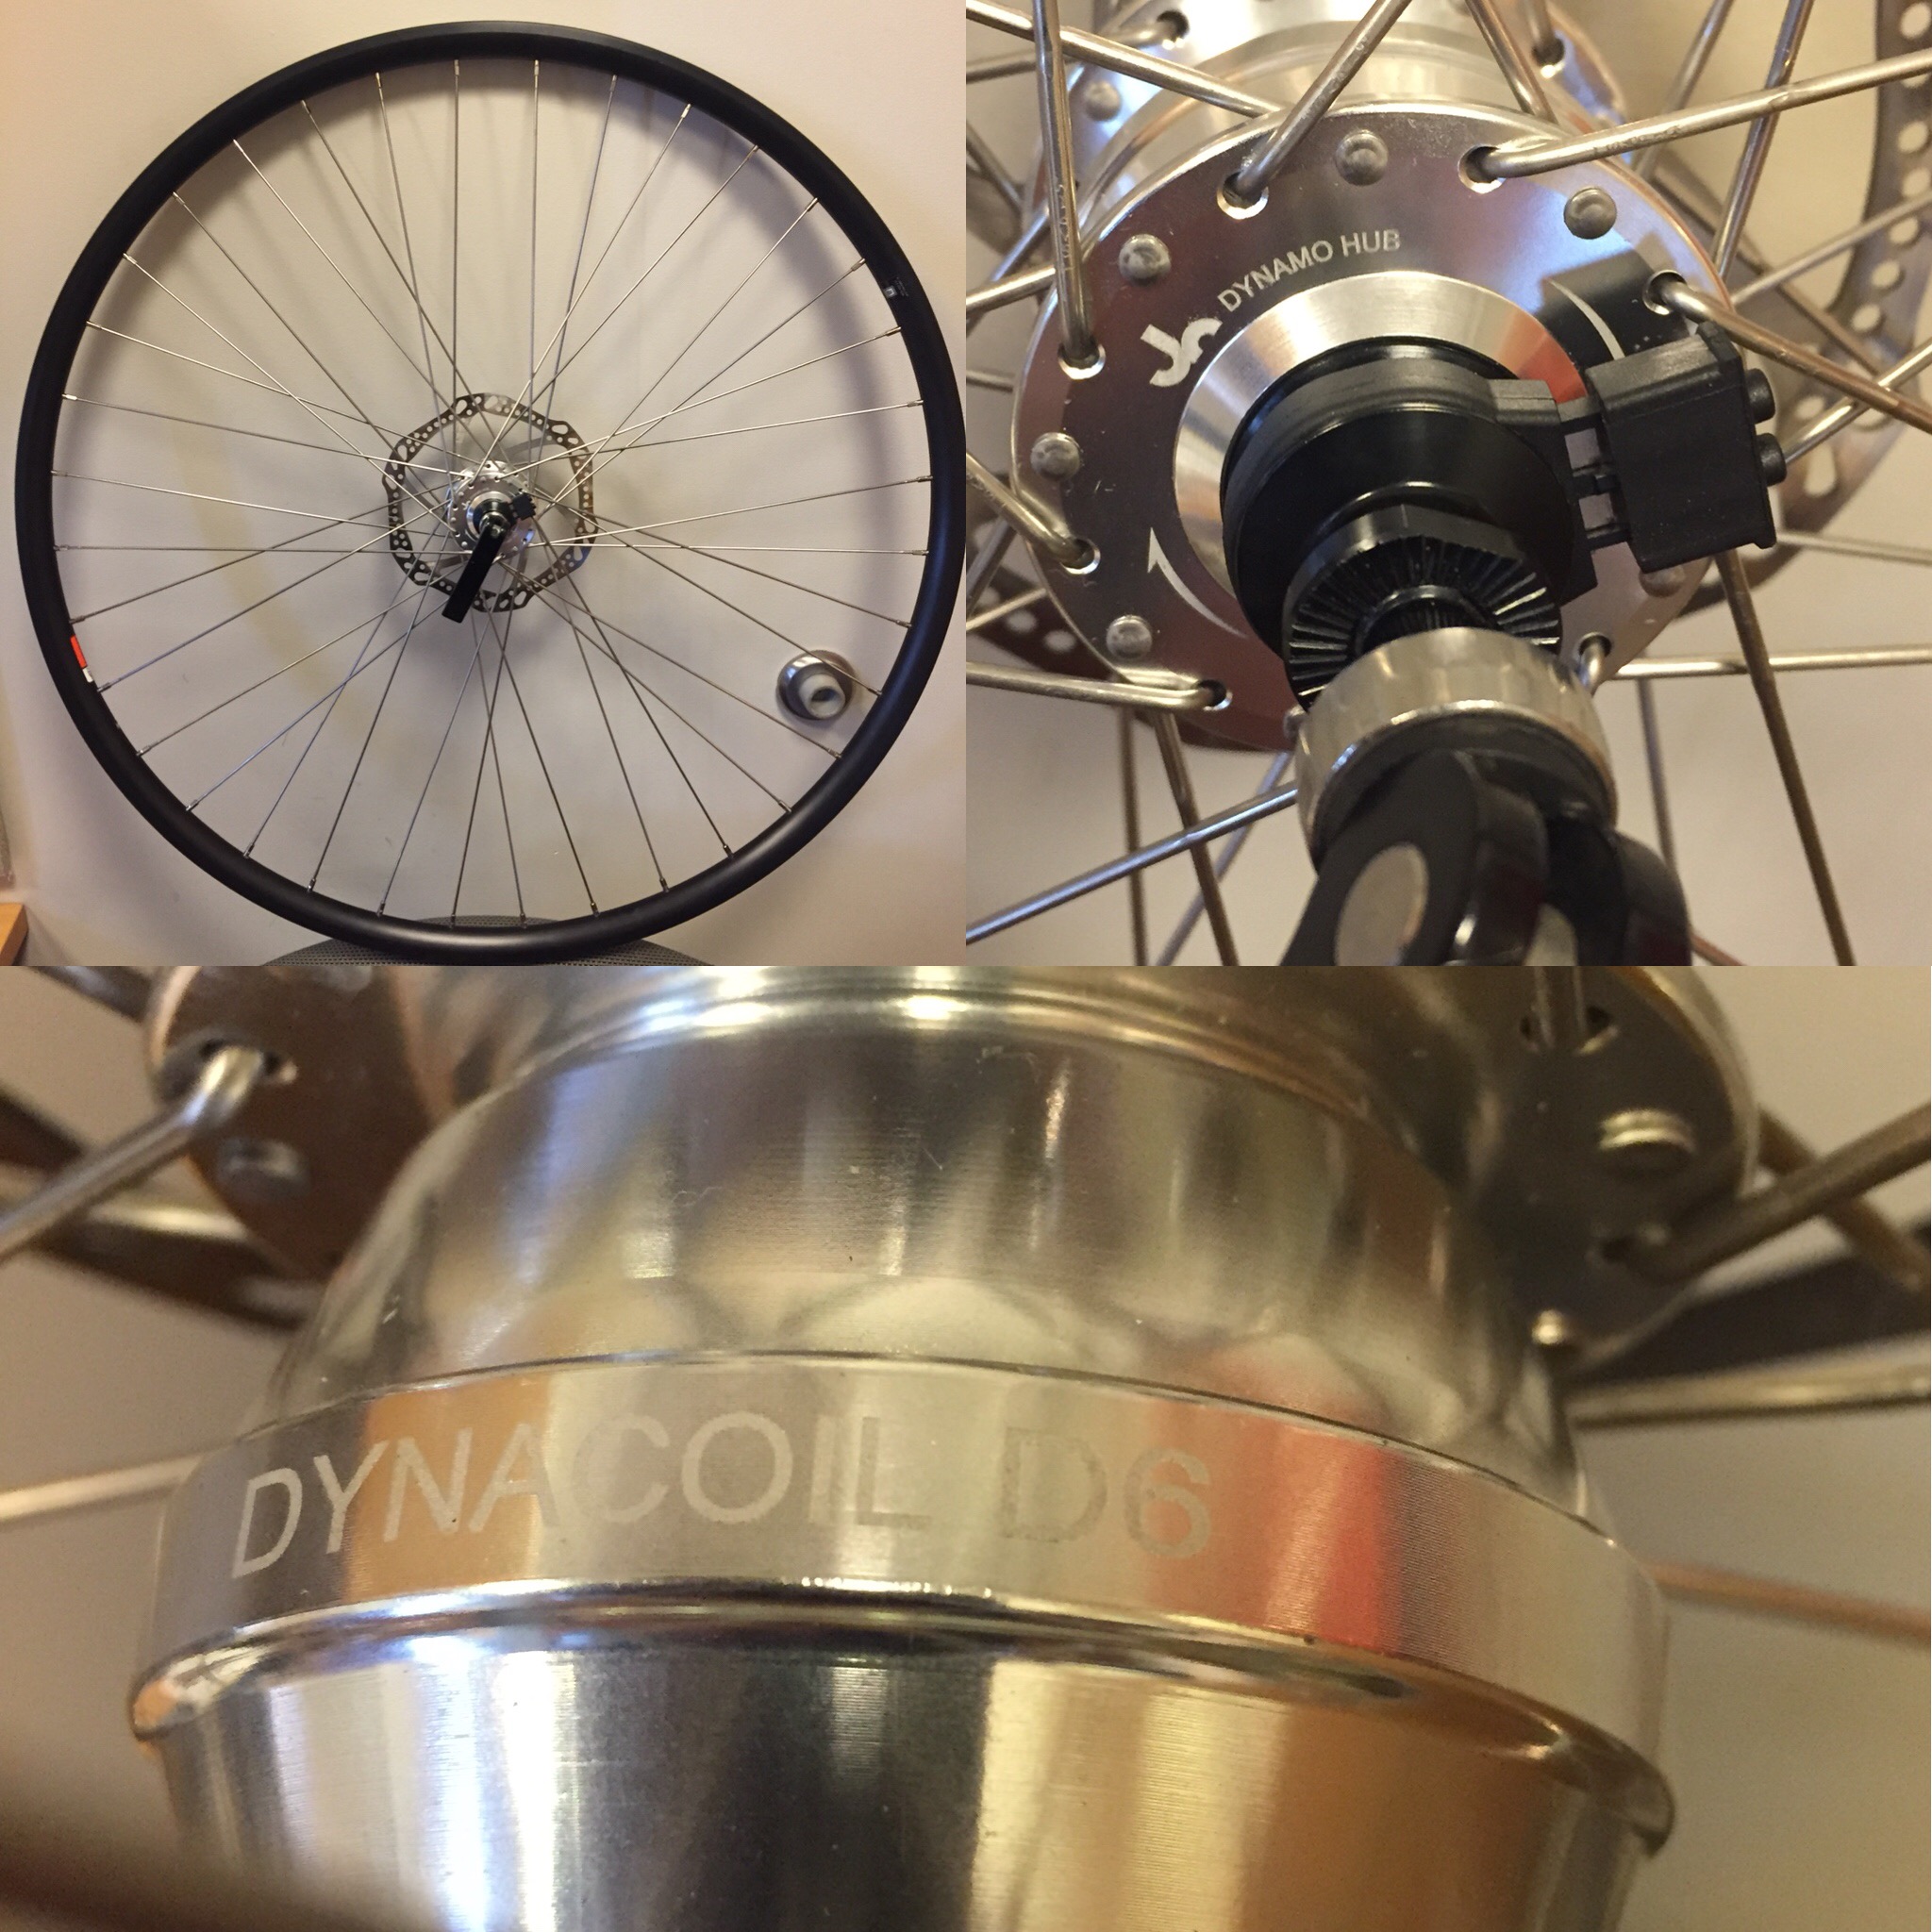 upper left: bike wheel; upper right: close up on dynamo hub exterior showing the charging attachment; bottom: body of the dynamo hub.